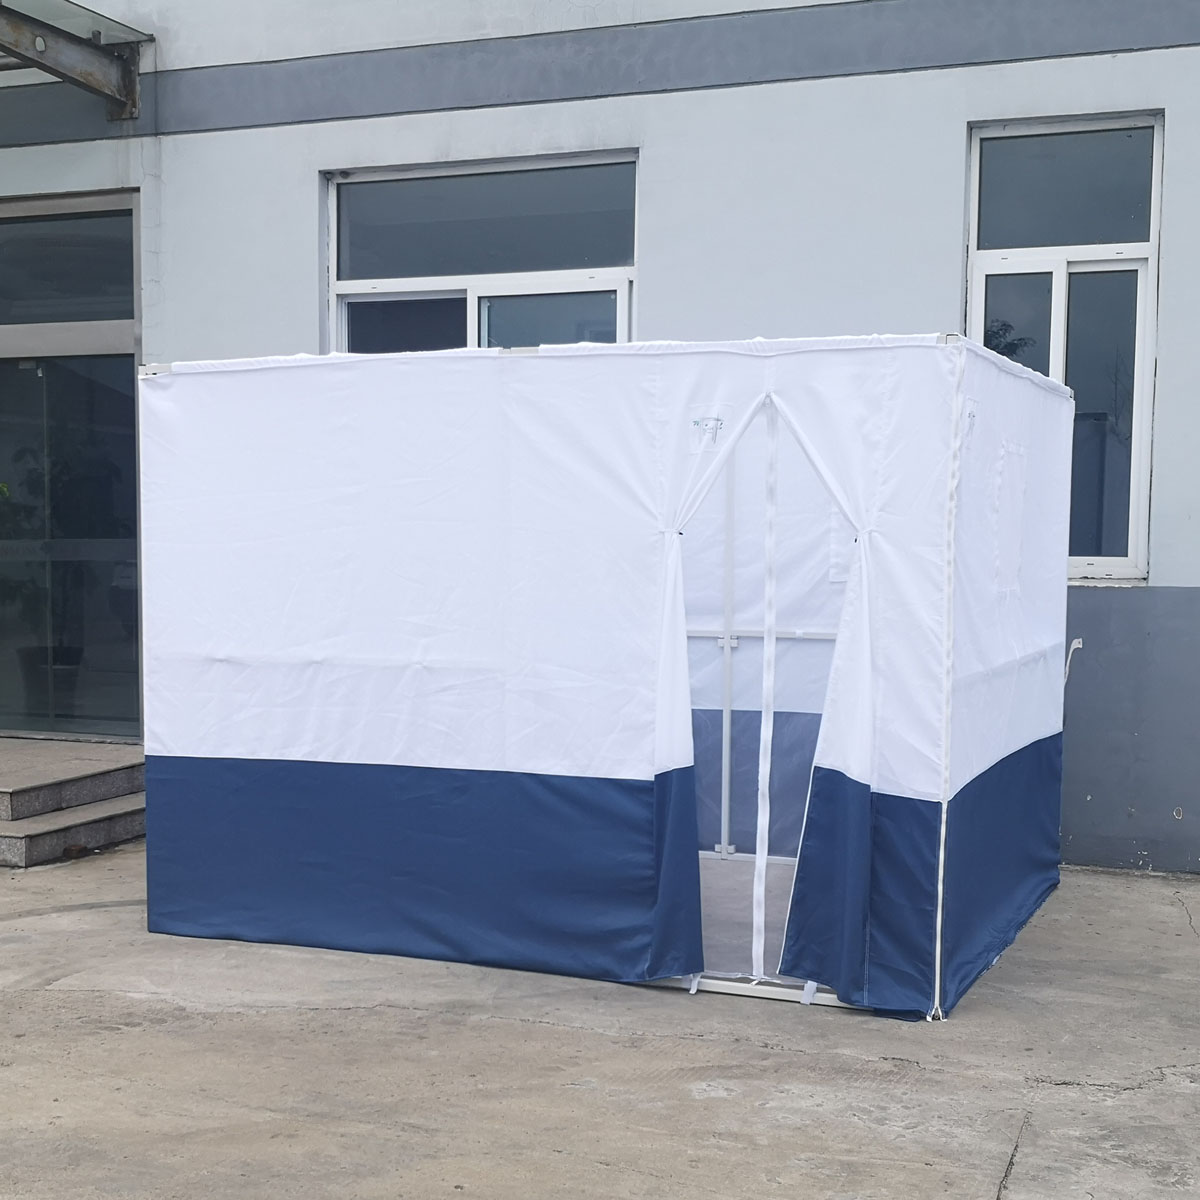 Portable Sukkah Tent 3x 4.2m For Sukkot NYC Featured Image